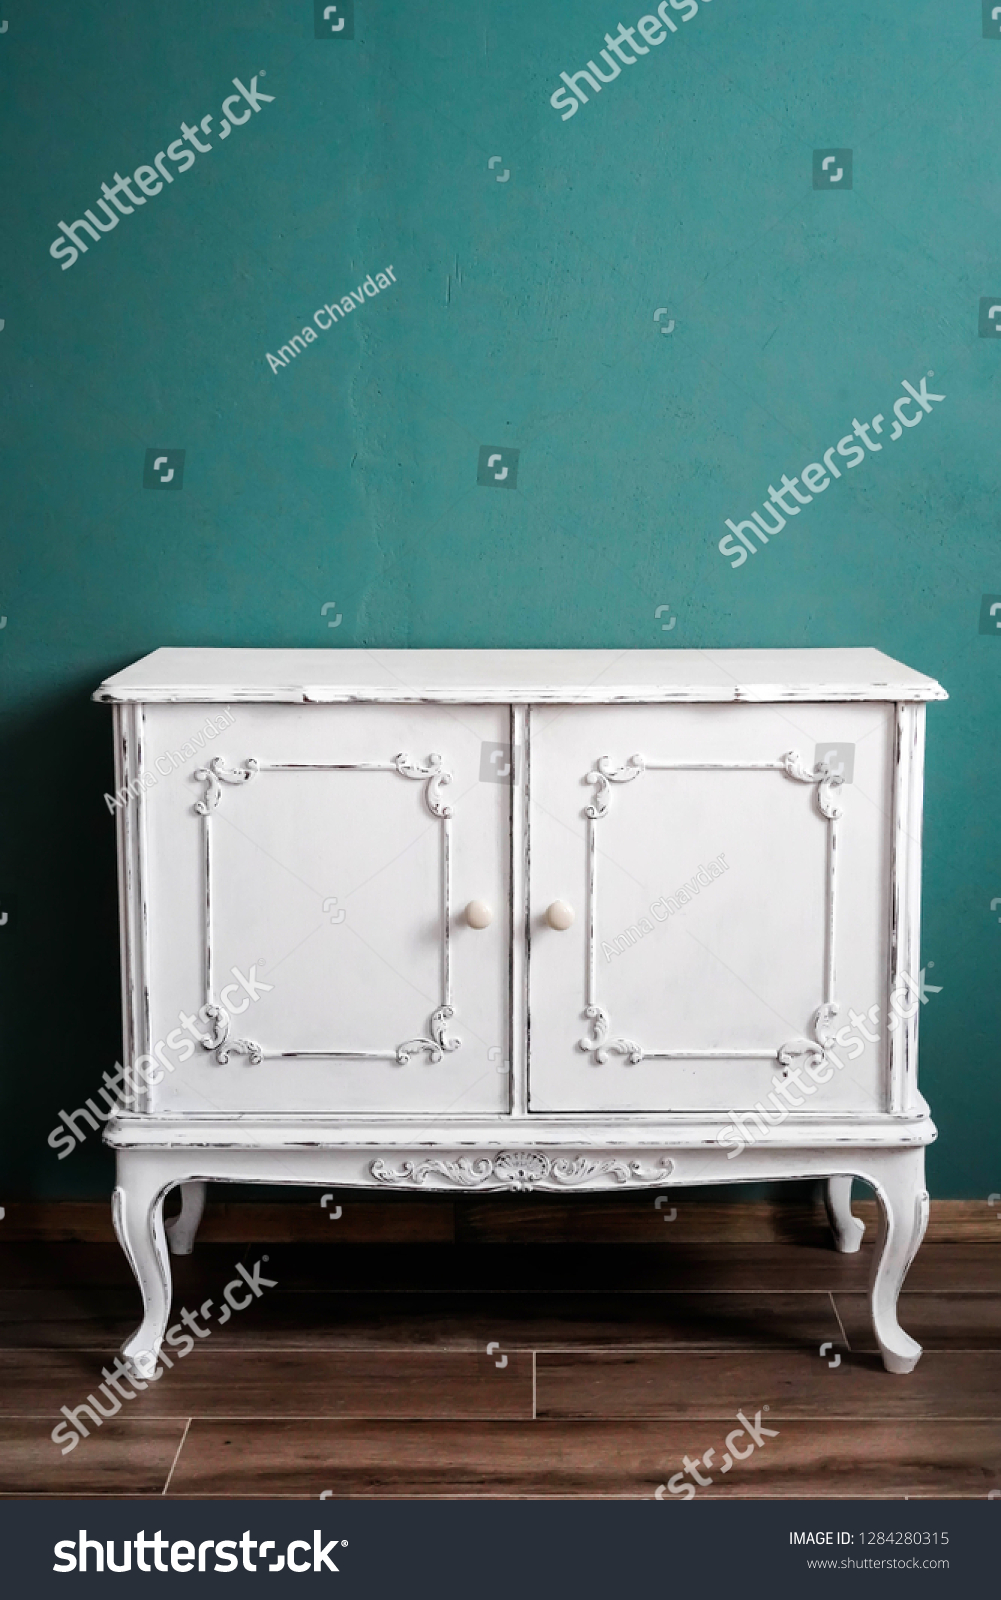 Wooden Vintage Dresser Ancient White Commode Stock Photo Edit Now